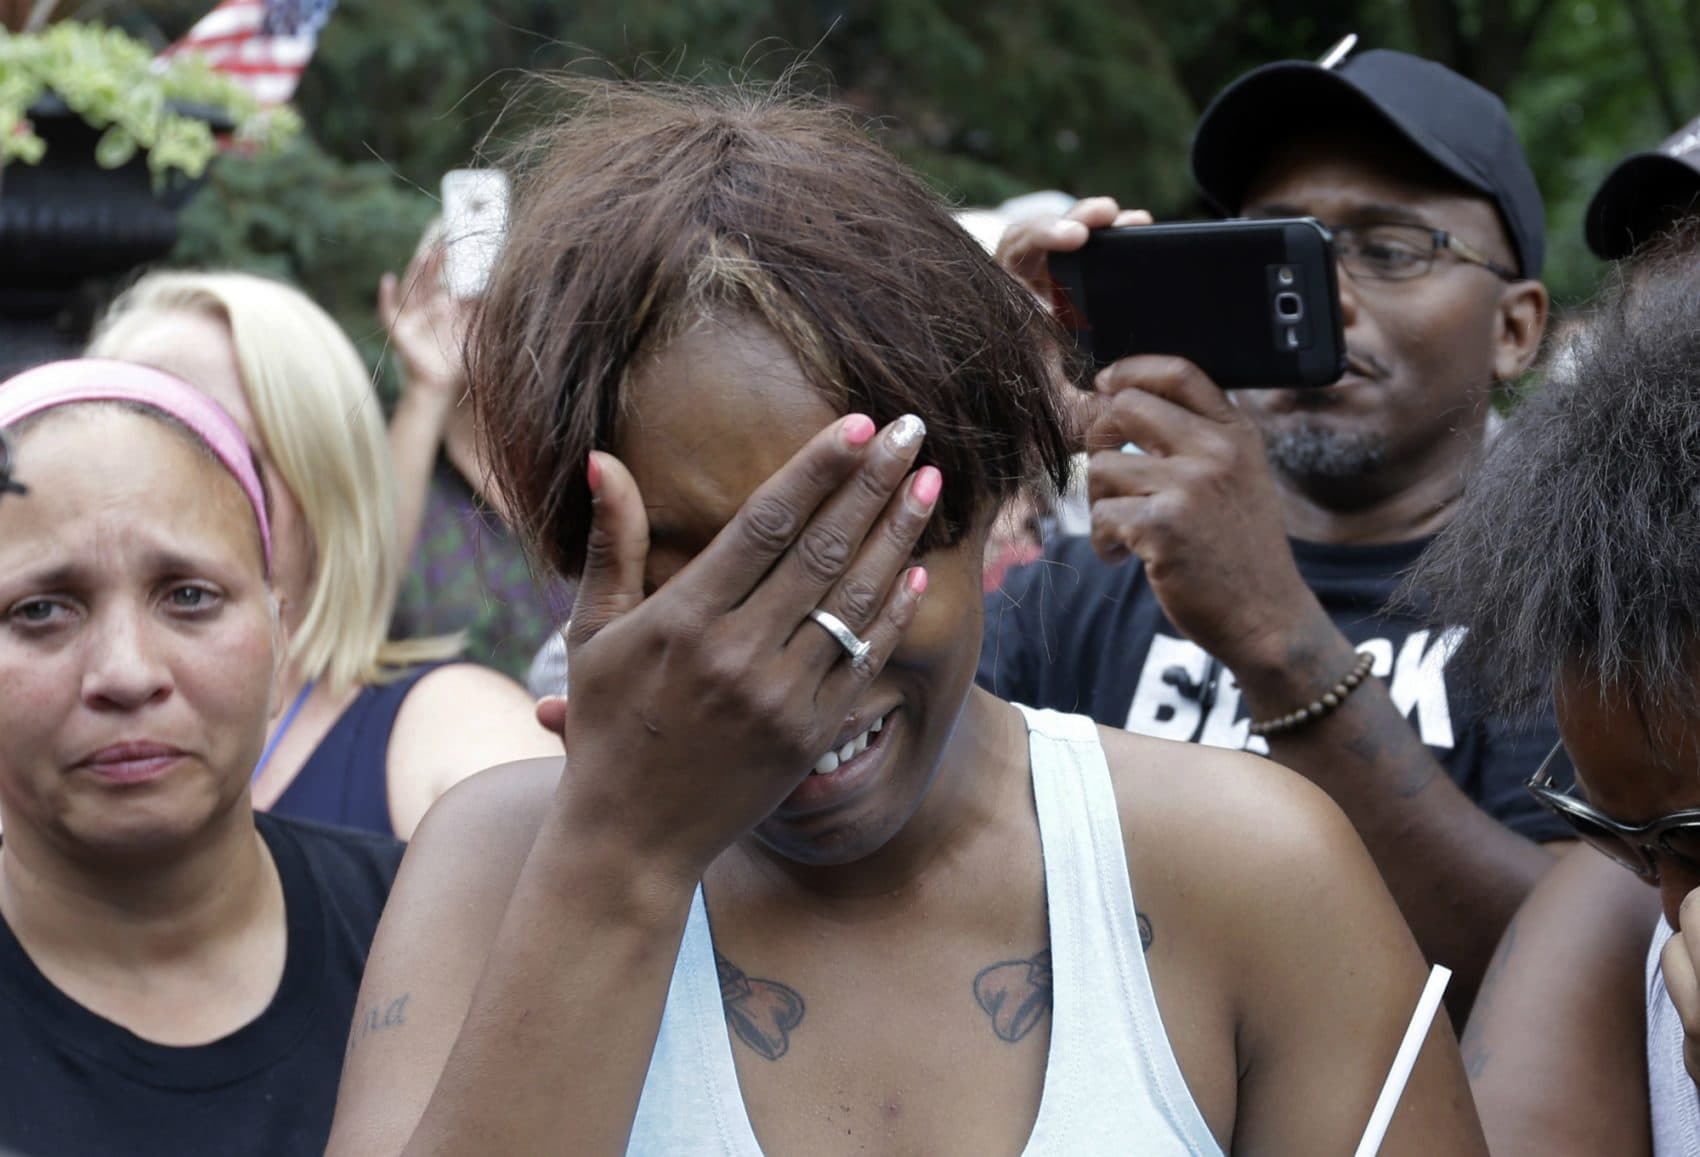 Diamond Reynolds, the girlfriend of Philando Castile, cries outside the governor's residence in St. Paul, Minn., on Thursday, July 7, 2016. Castile was shot and killed after a traffic stop by police in Falcon Heights, Wednesday night. A video shot by Reynolds of the shooting  went viral.  (Jim Mone/AP)